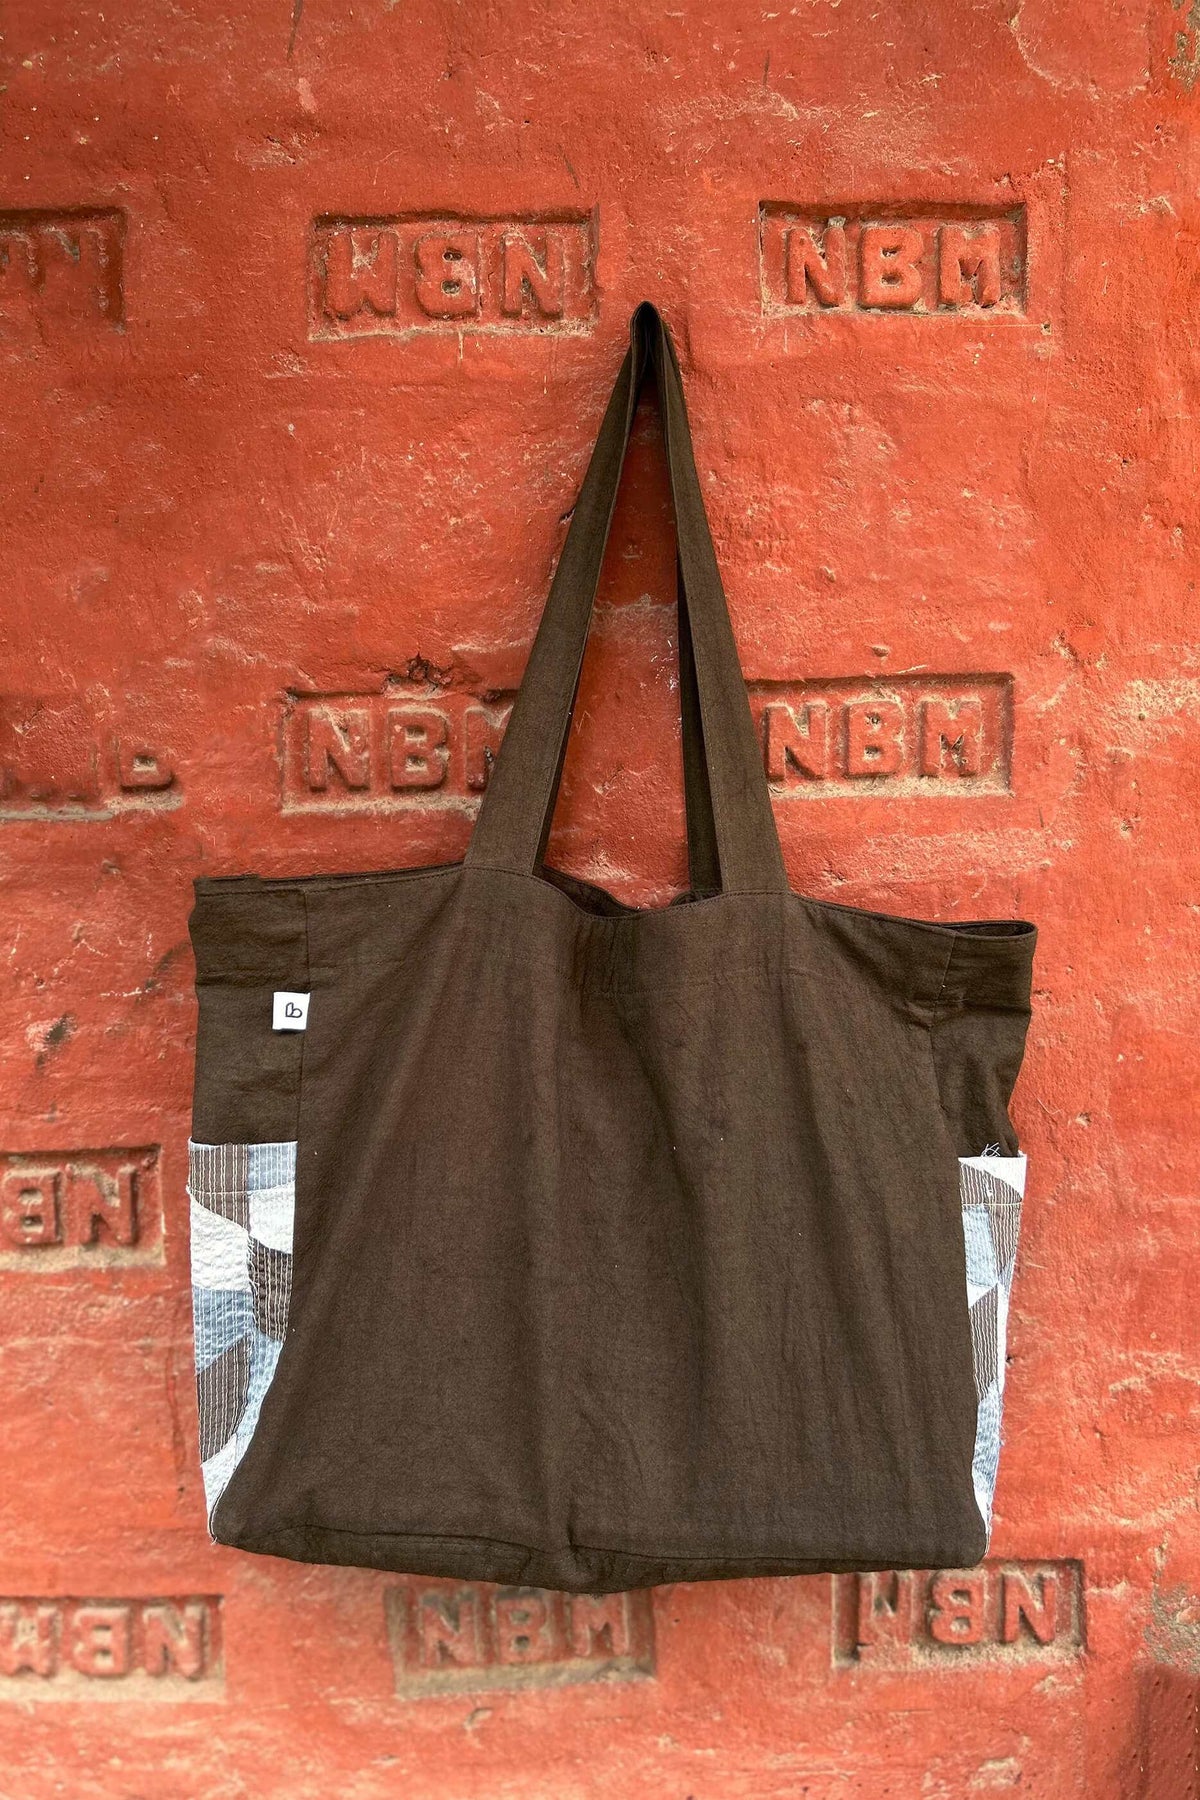 Charcoal Grey Cotton Tote Bag with Chindi Side Pockets.